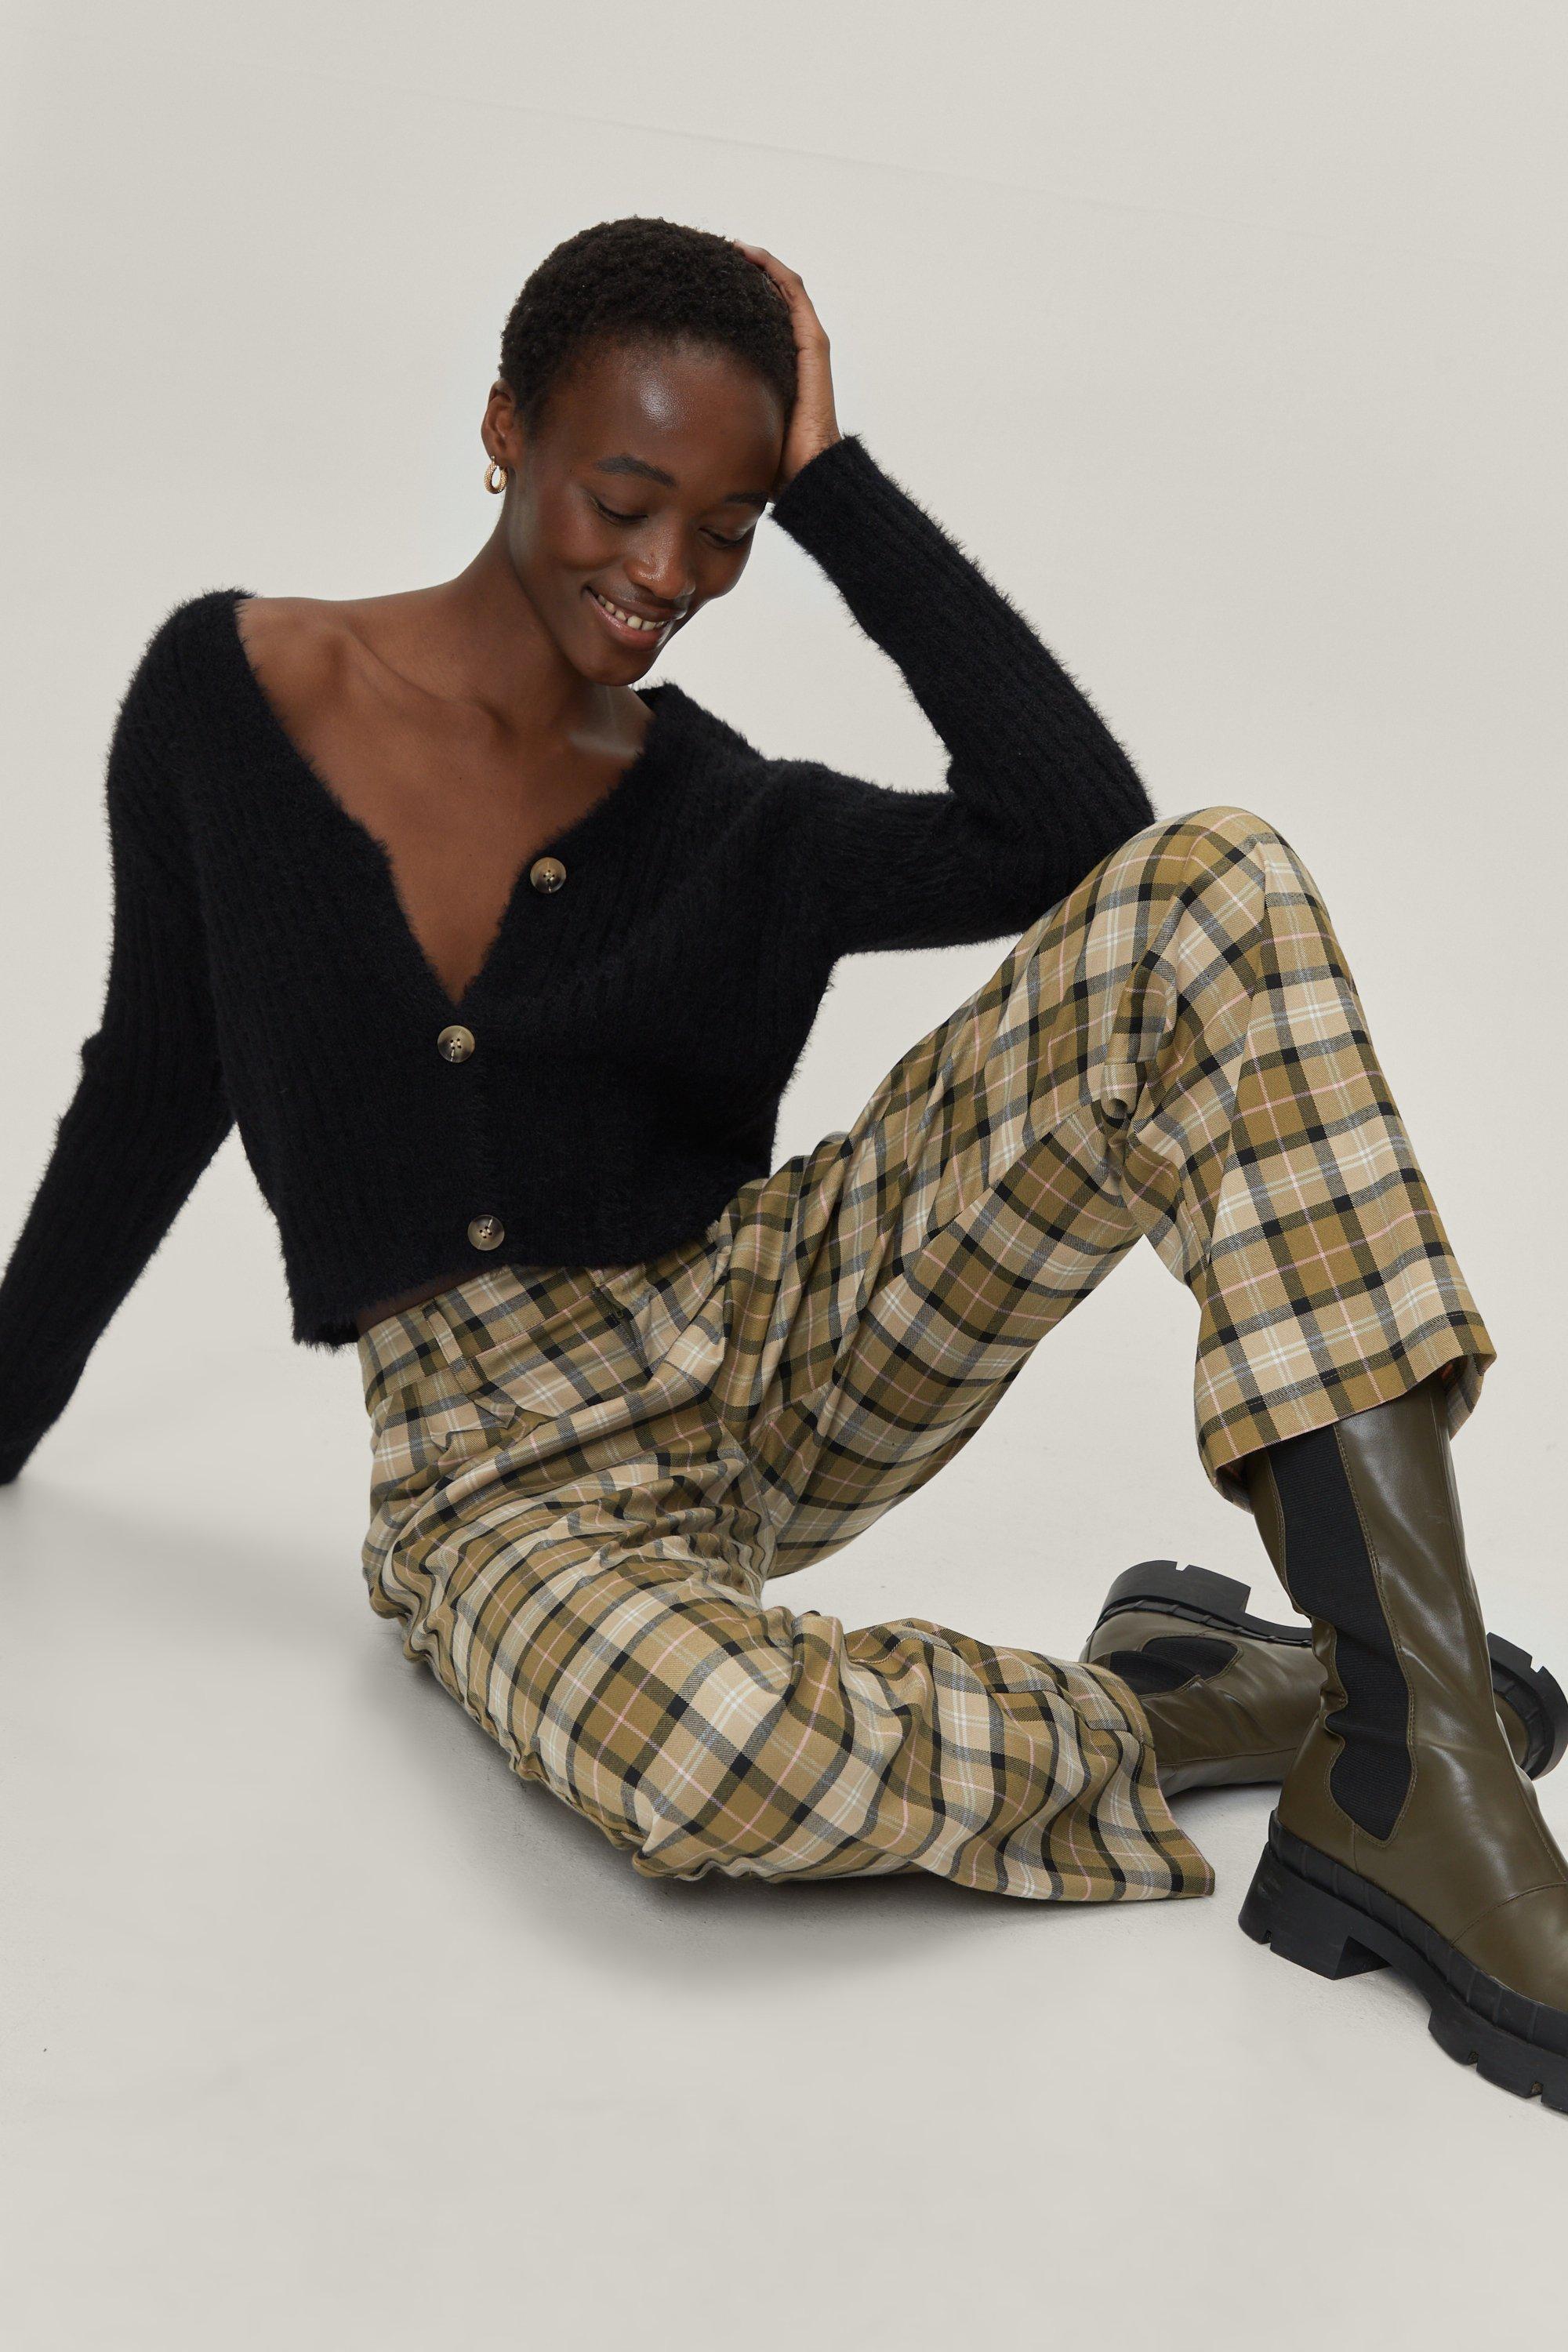 Black Check Pull On Trousers  New Look